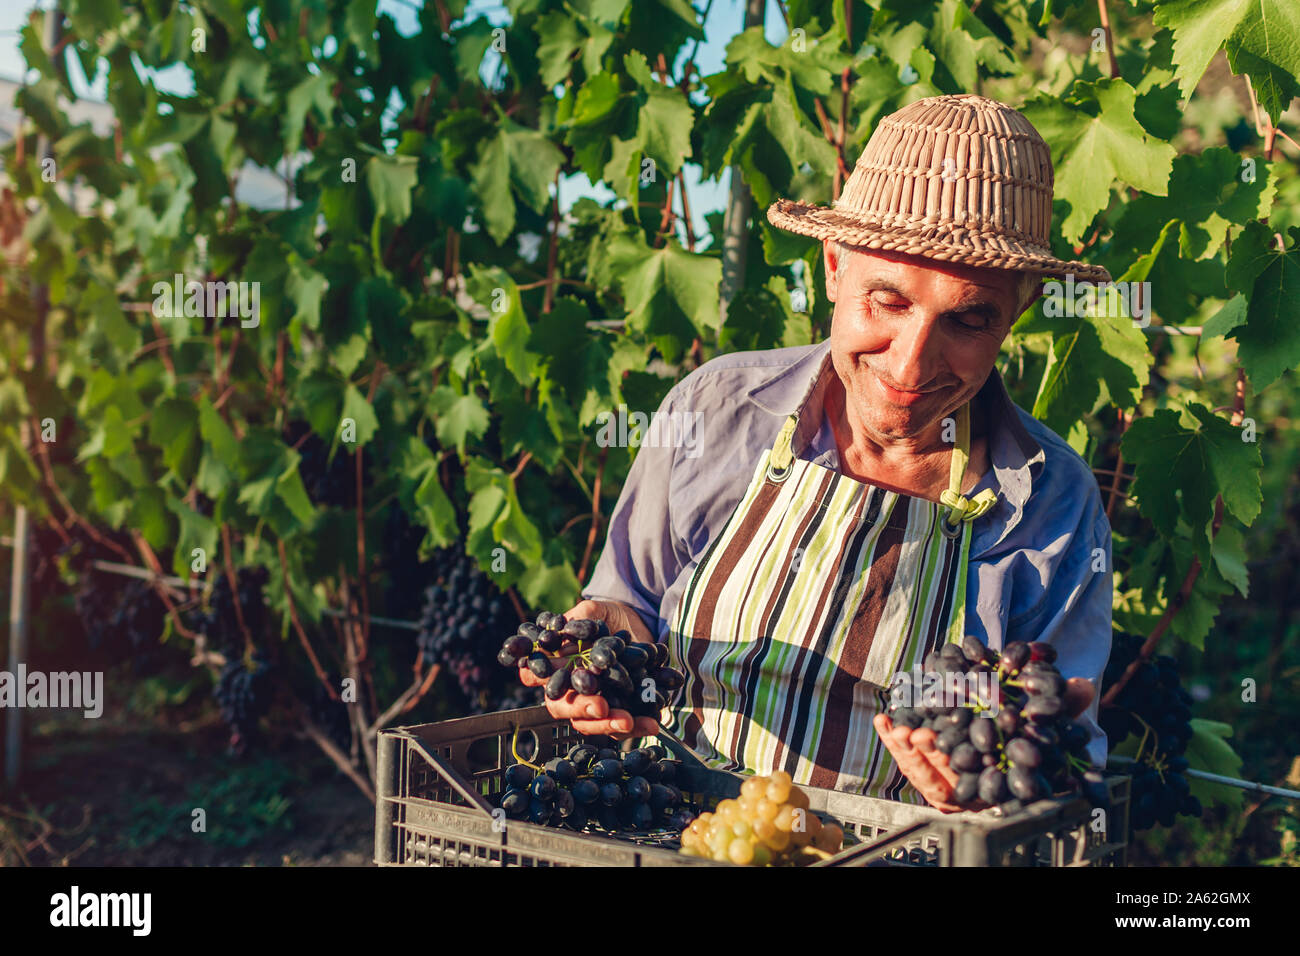 Farmer picking crop of grapes on ecological farm. Happy senior man holding green and blue grapes. Gardening, farming concept Stock Photo